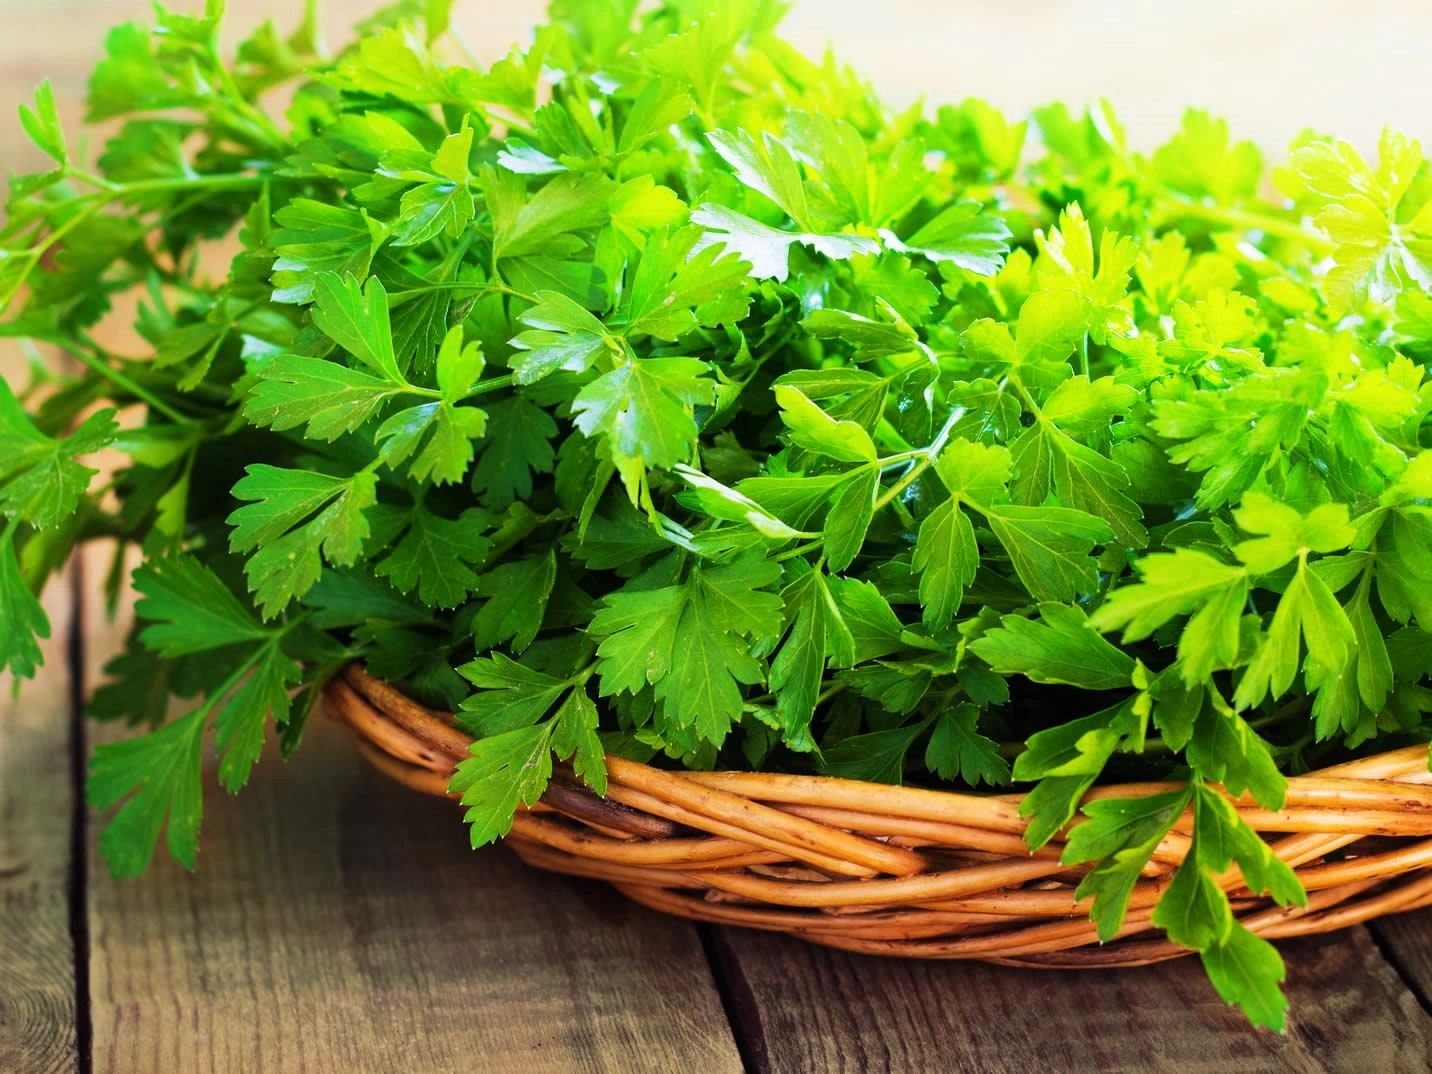 The Nutritional Benefits of Parsley